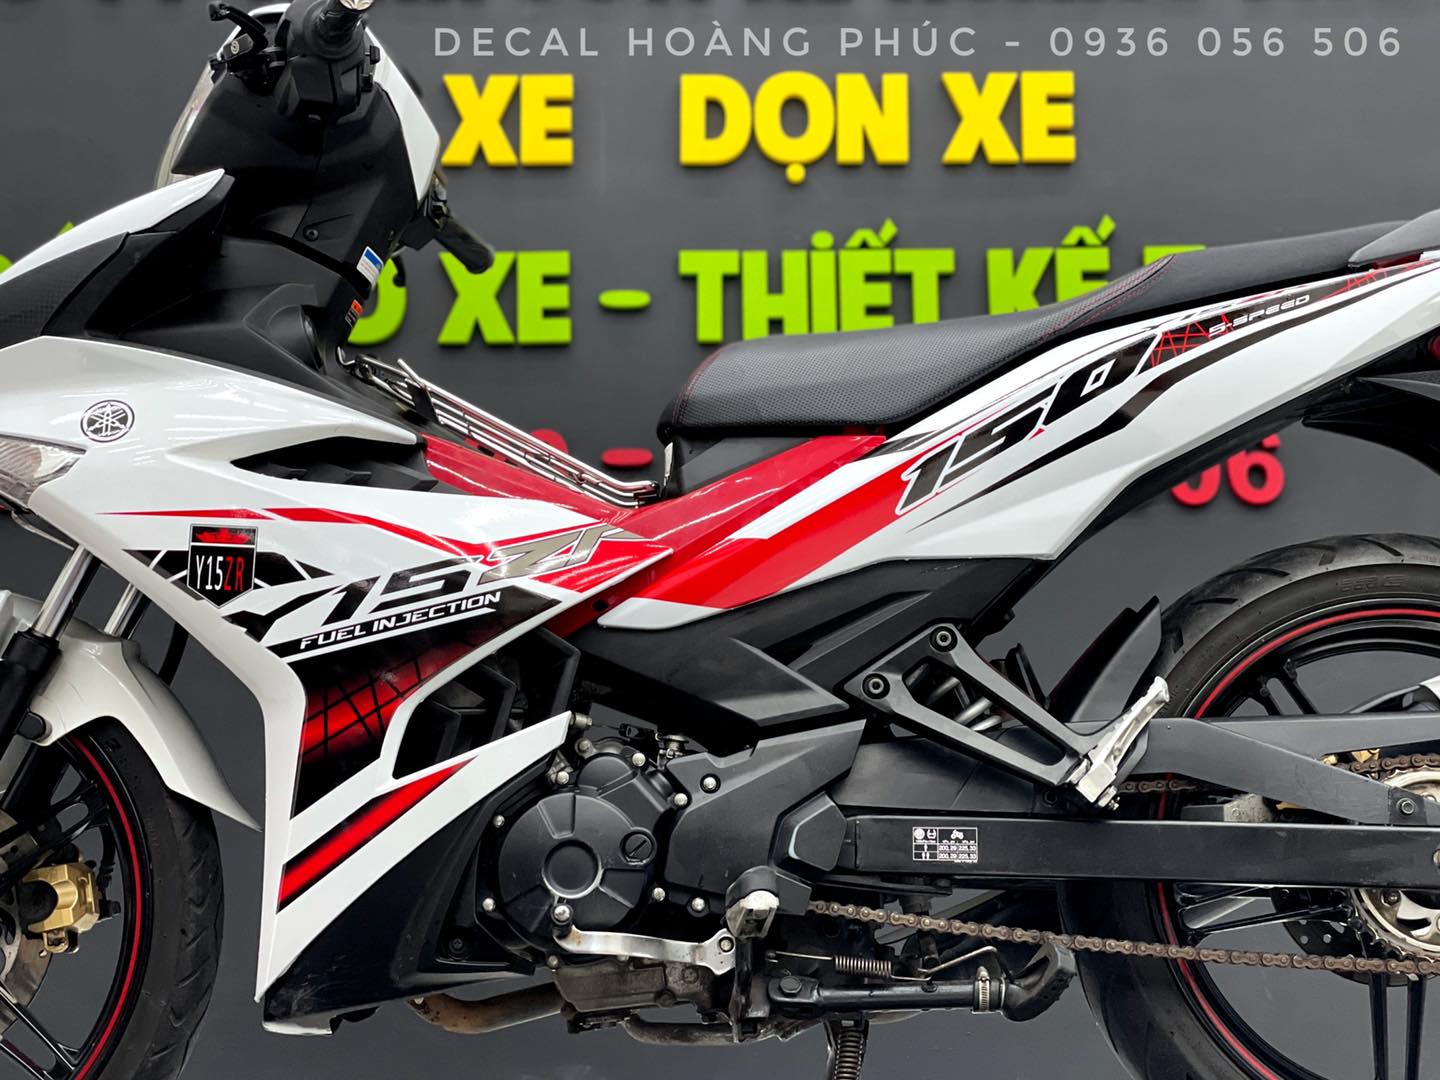 decal xe may